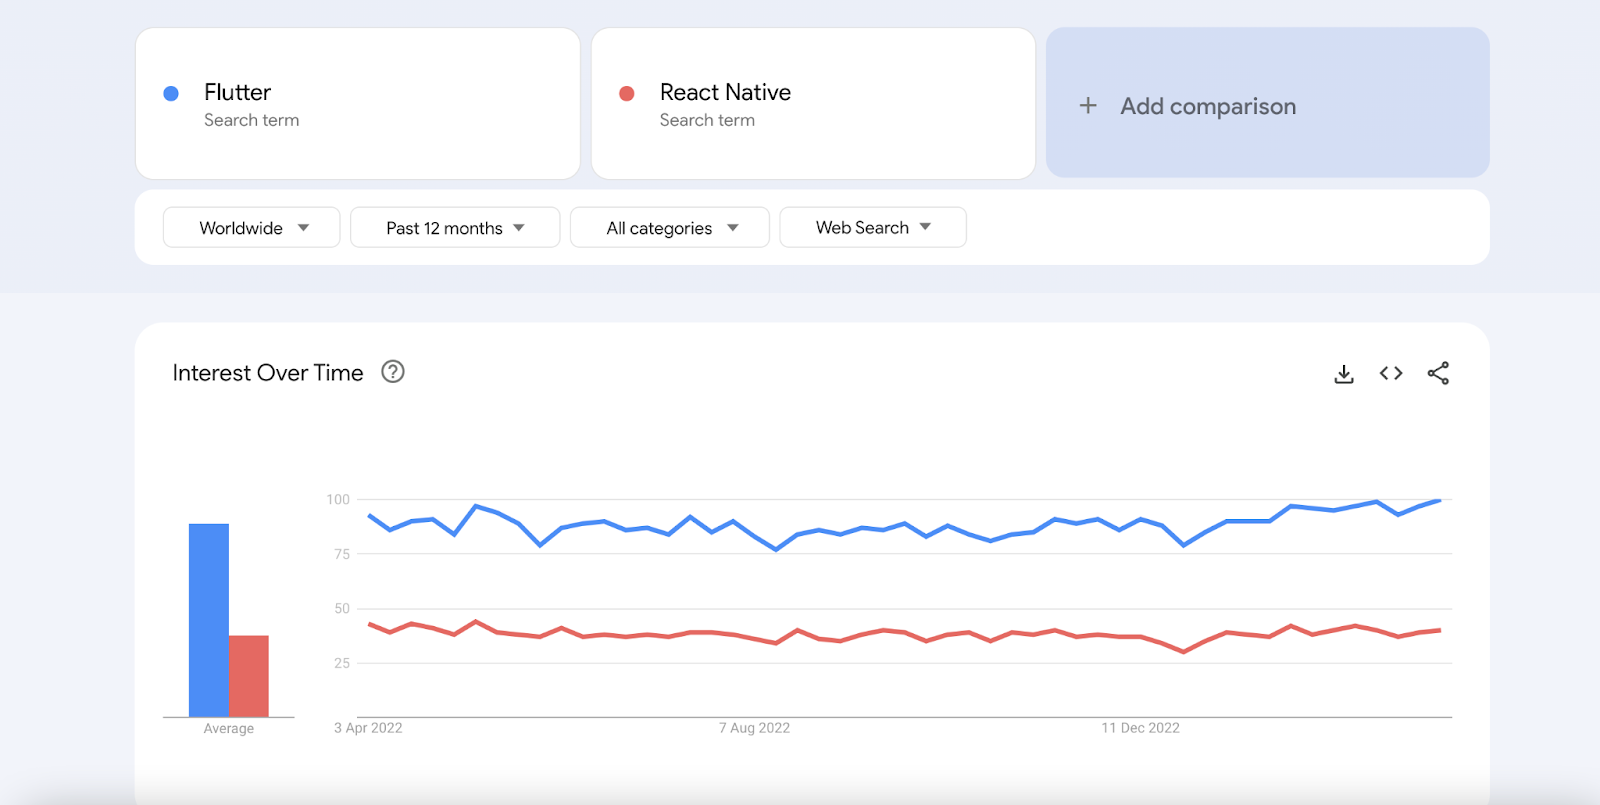  React Native and Flutter remains high.